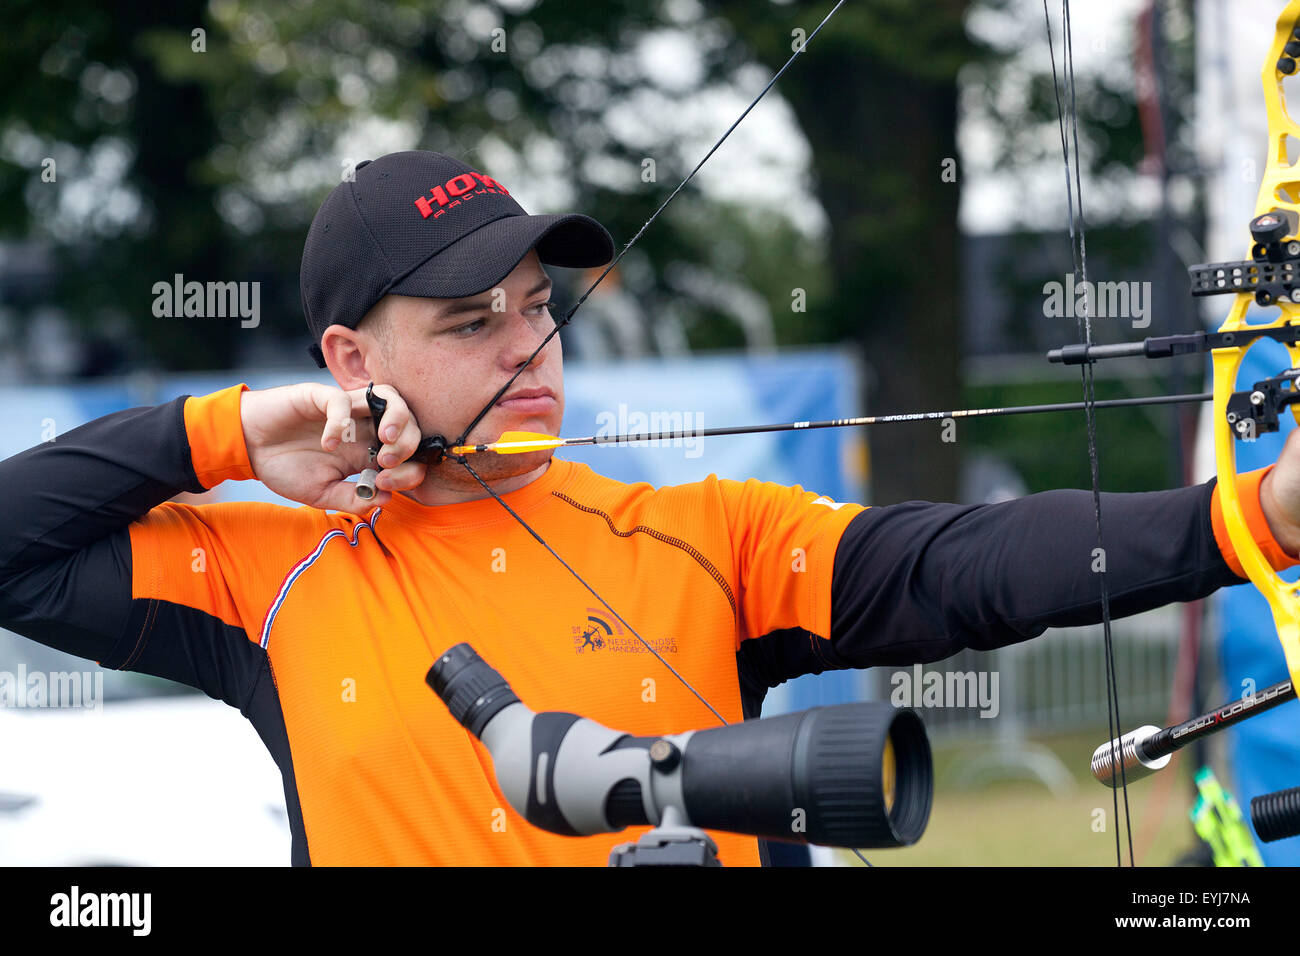 Copenhagen, Denmark, July 30th, 2015: Dutch archer Mike Schloesser competes in the World Archery Championships in Copenhagen during Thursday's individual matches  in compound bow. Credit:  OJPHOTOS/Alamy Live News Stock Photo